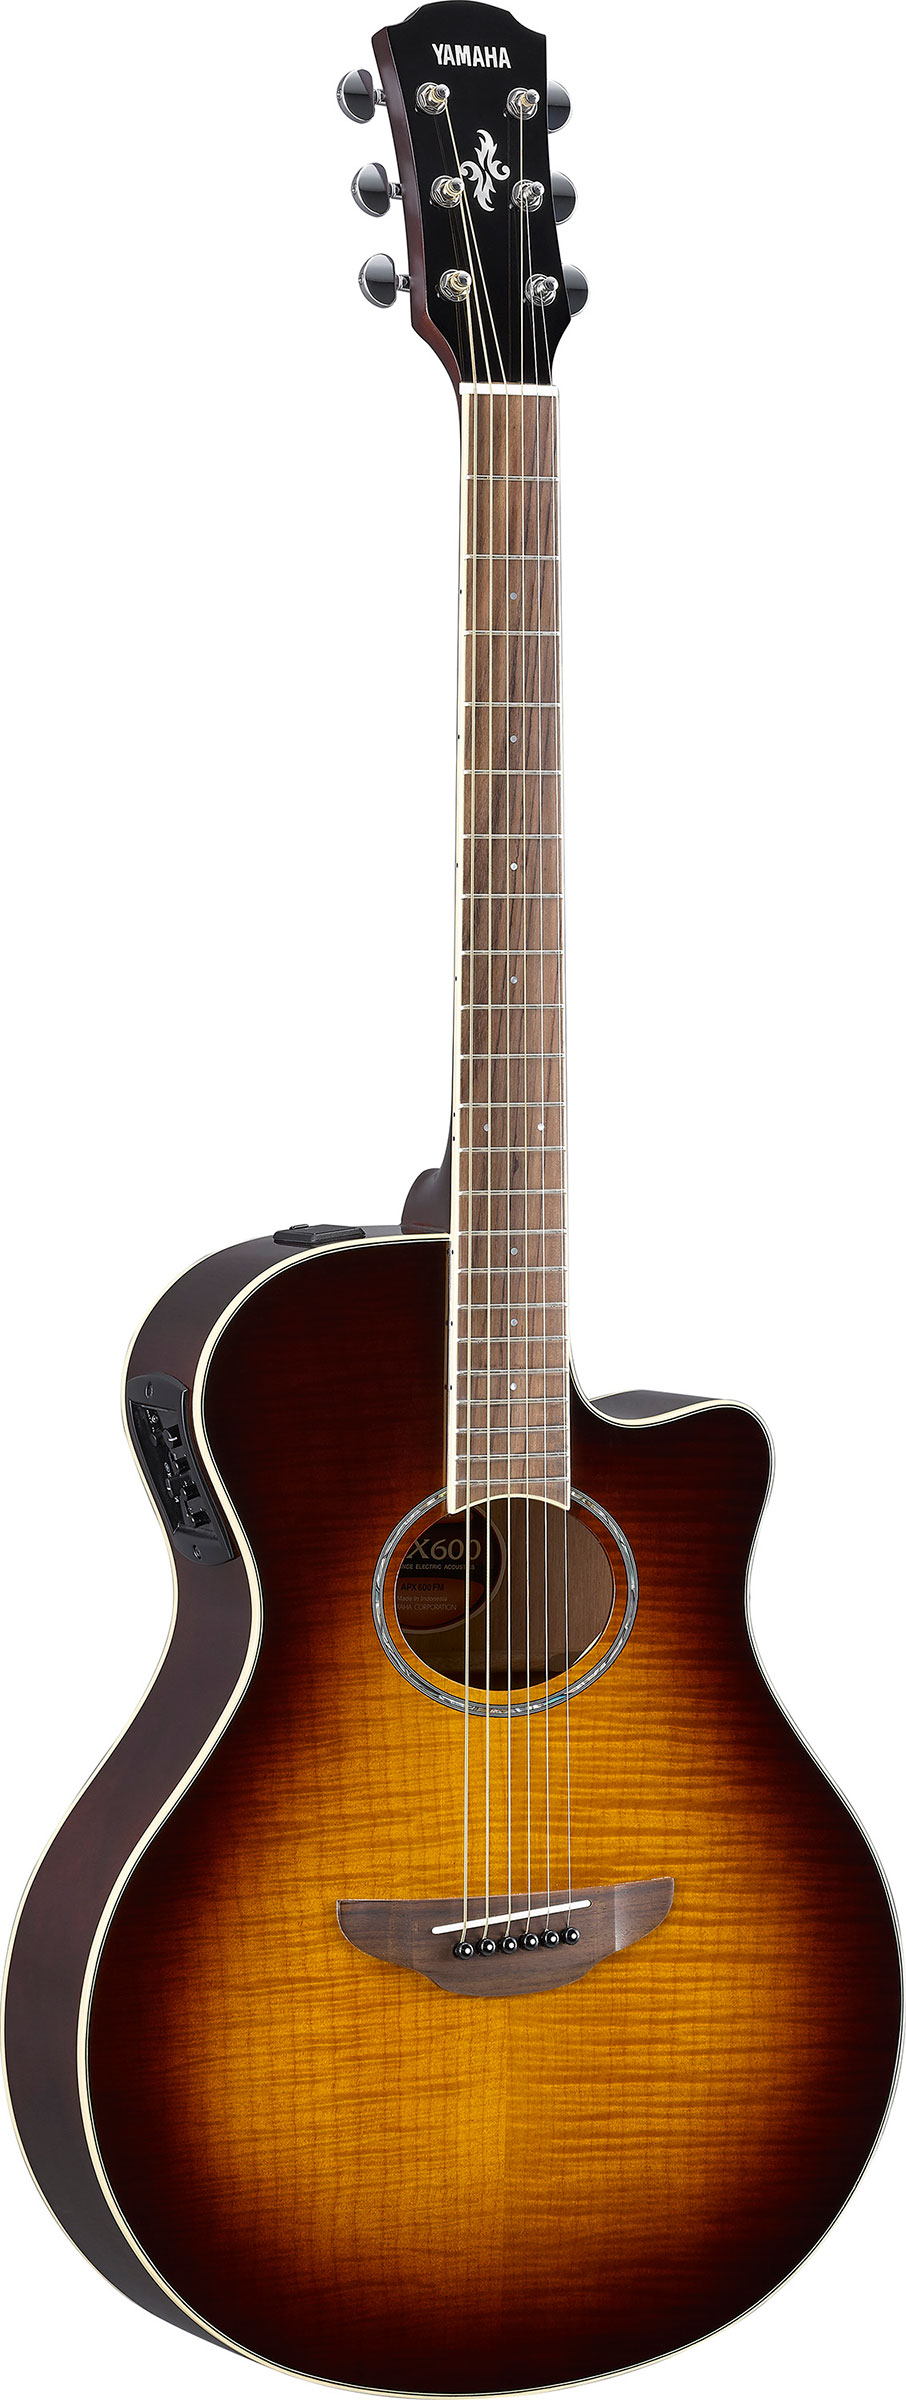 An image of B-Stock Yamaha APX600 Flame Maple Top Tobacco Brown Sunburst | PMT Online